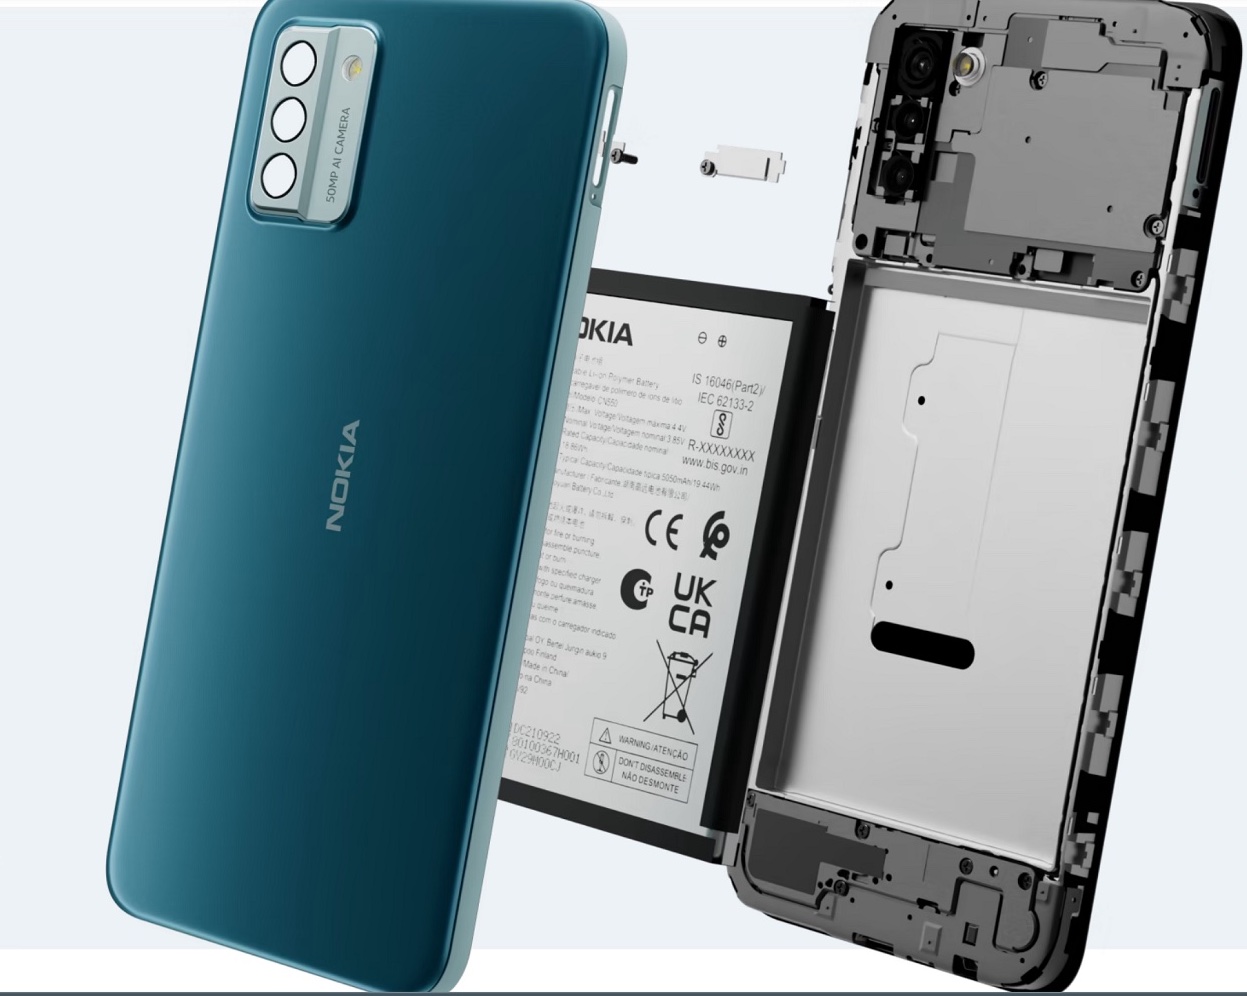 nokia-smartphone-with-diy-features-launches-as-‘right-to-repair’-demand-heightens